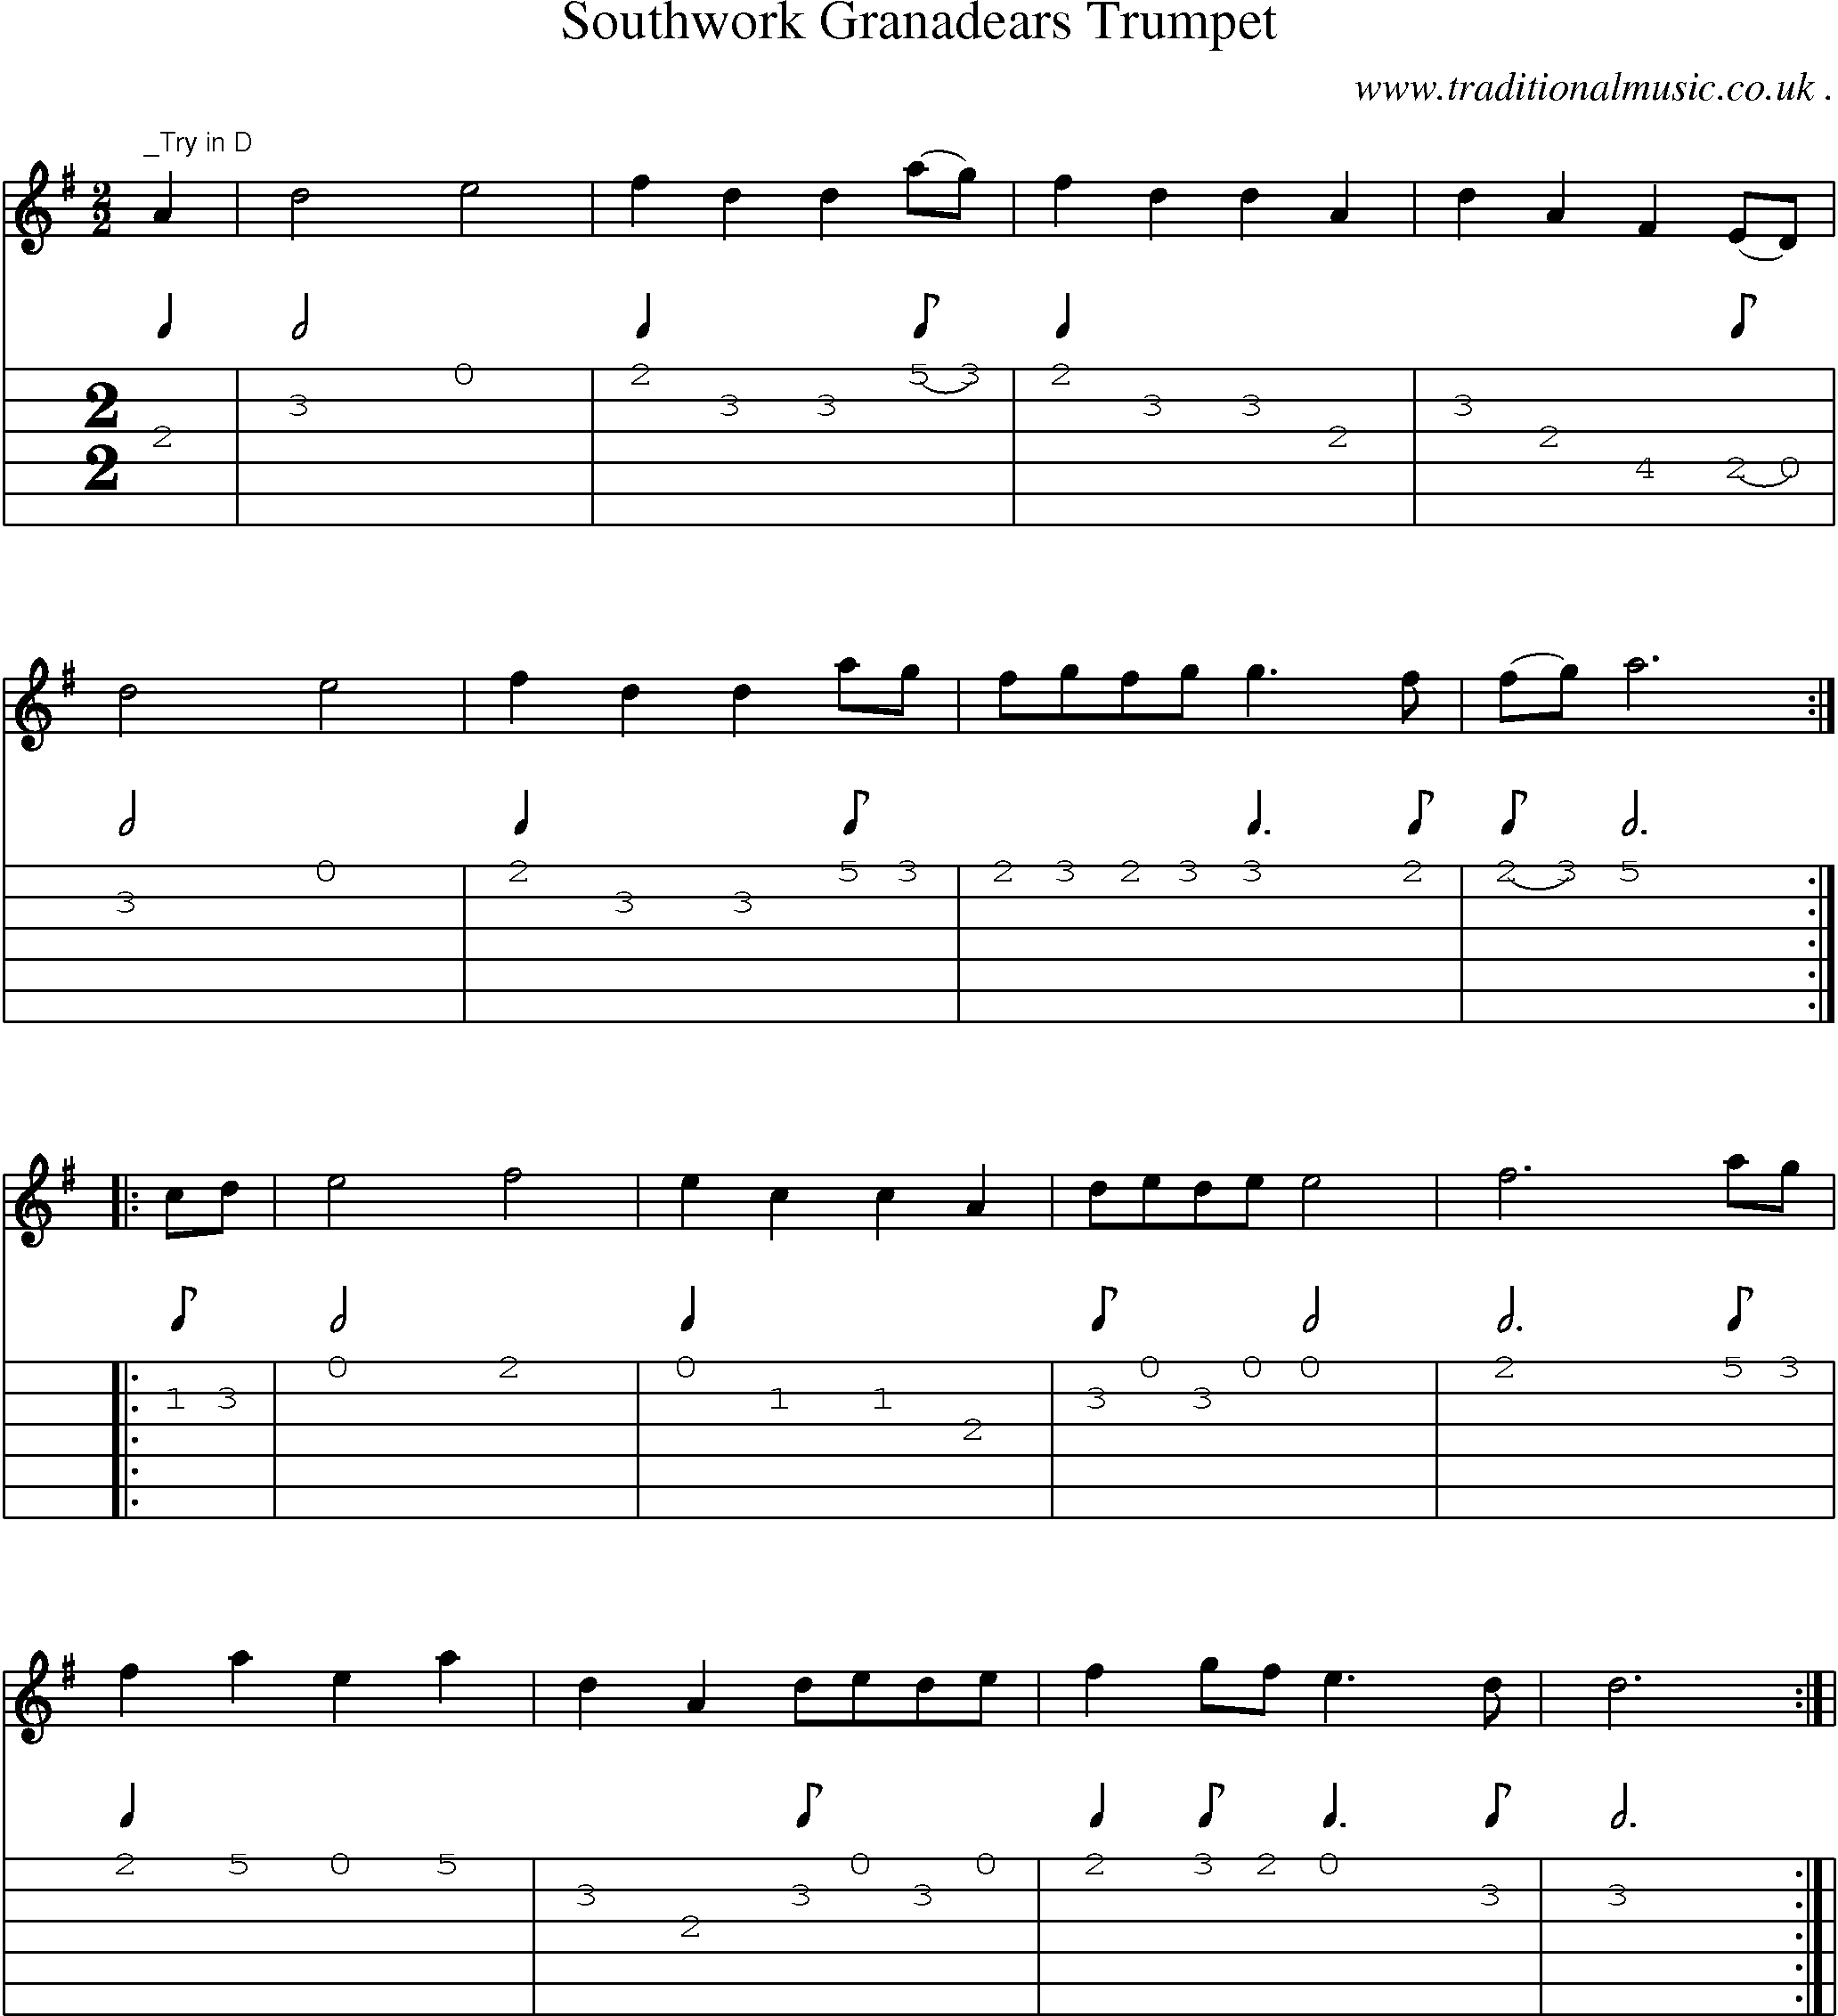 Sheet-Music and Guitar Tabs for Southwork Granadears Trumpet